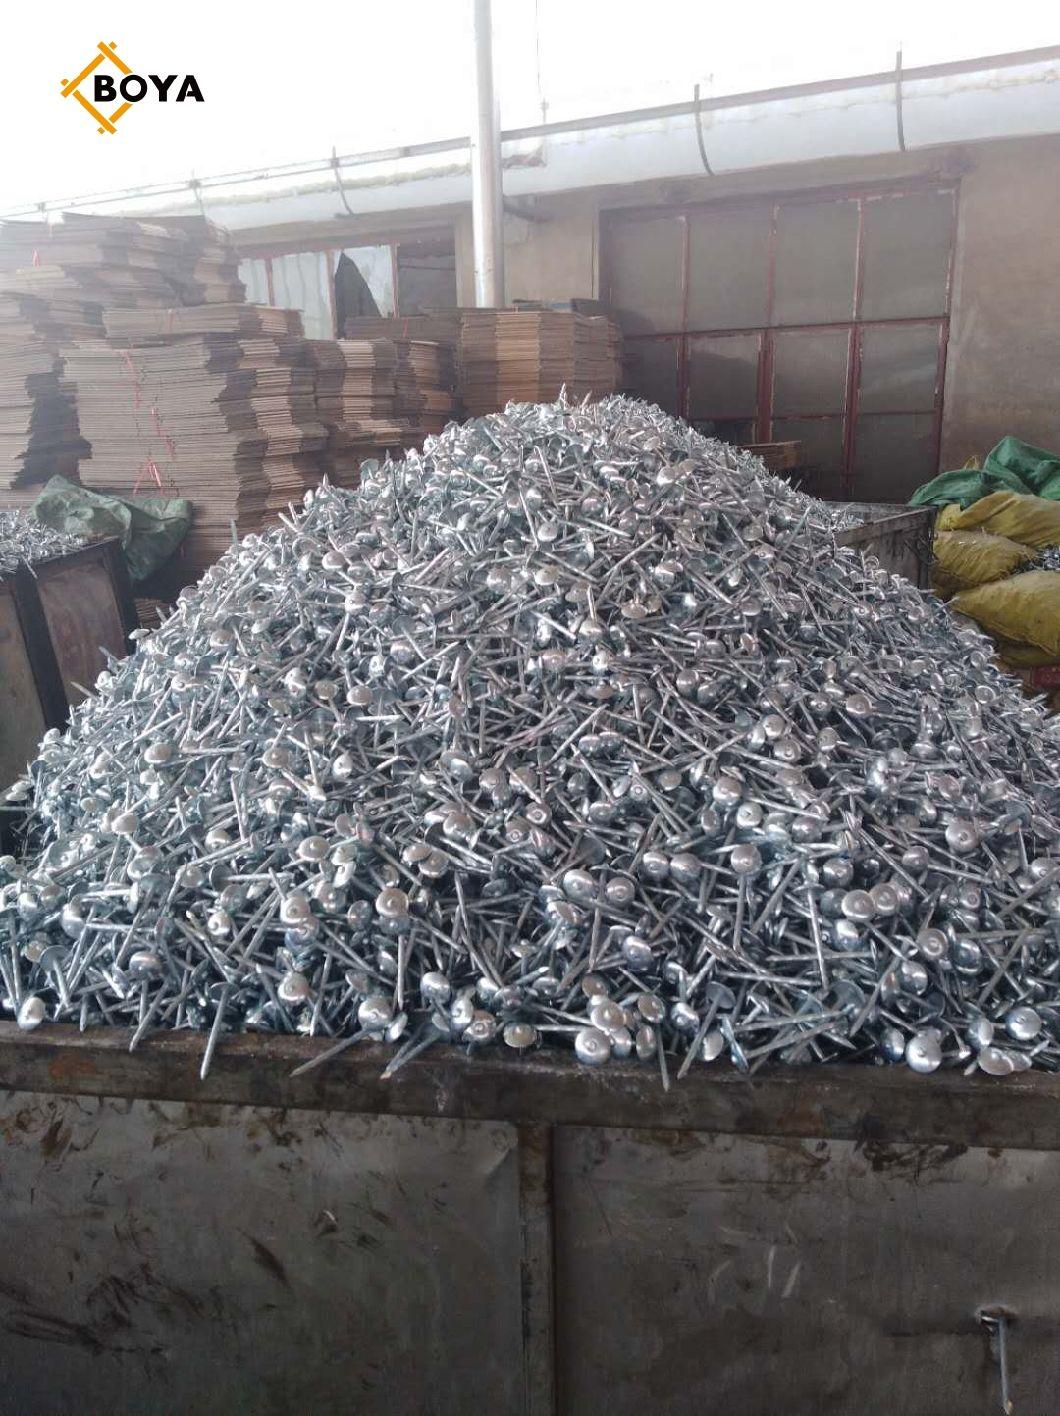 Standard Size Galvanized Q195 Roofing Nails with Rubber Washer